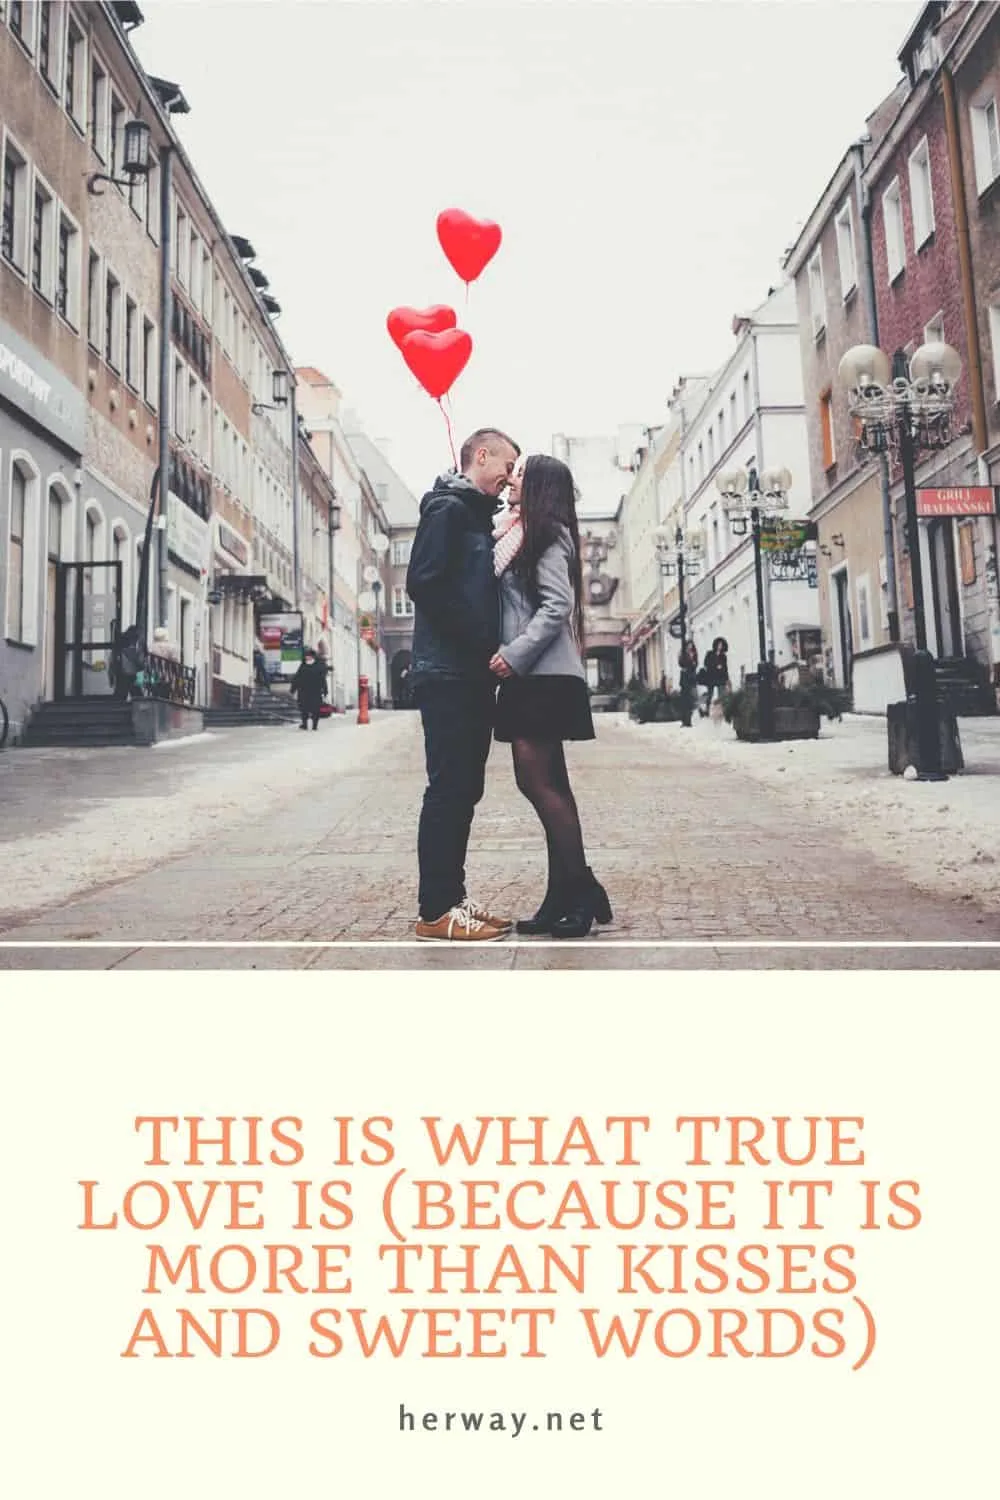 THIS IS WHAT TRUE LOVE IS (BECAUSE IT IS MORE THAN KISSES AND SWEET WORDS)